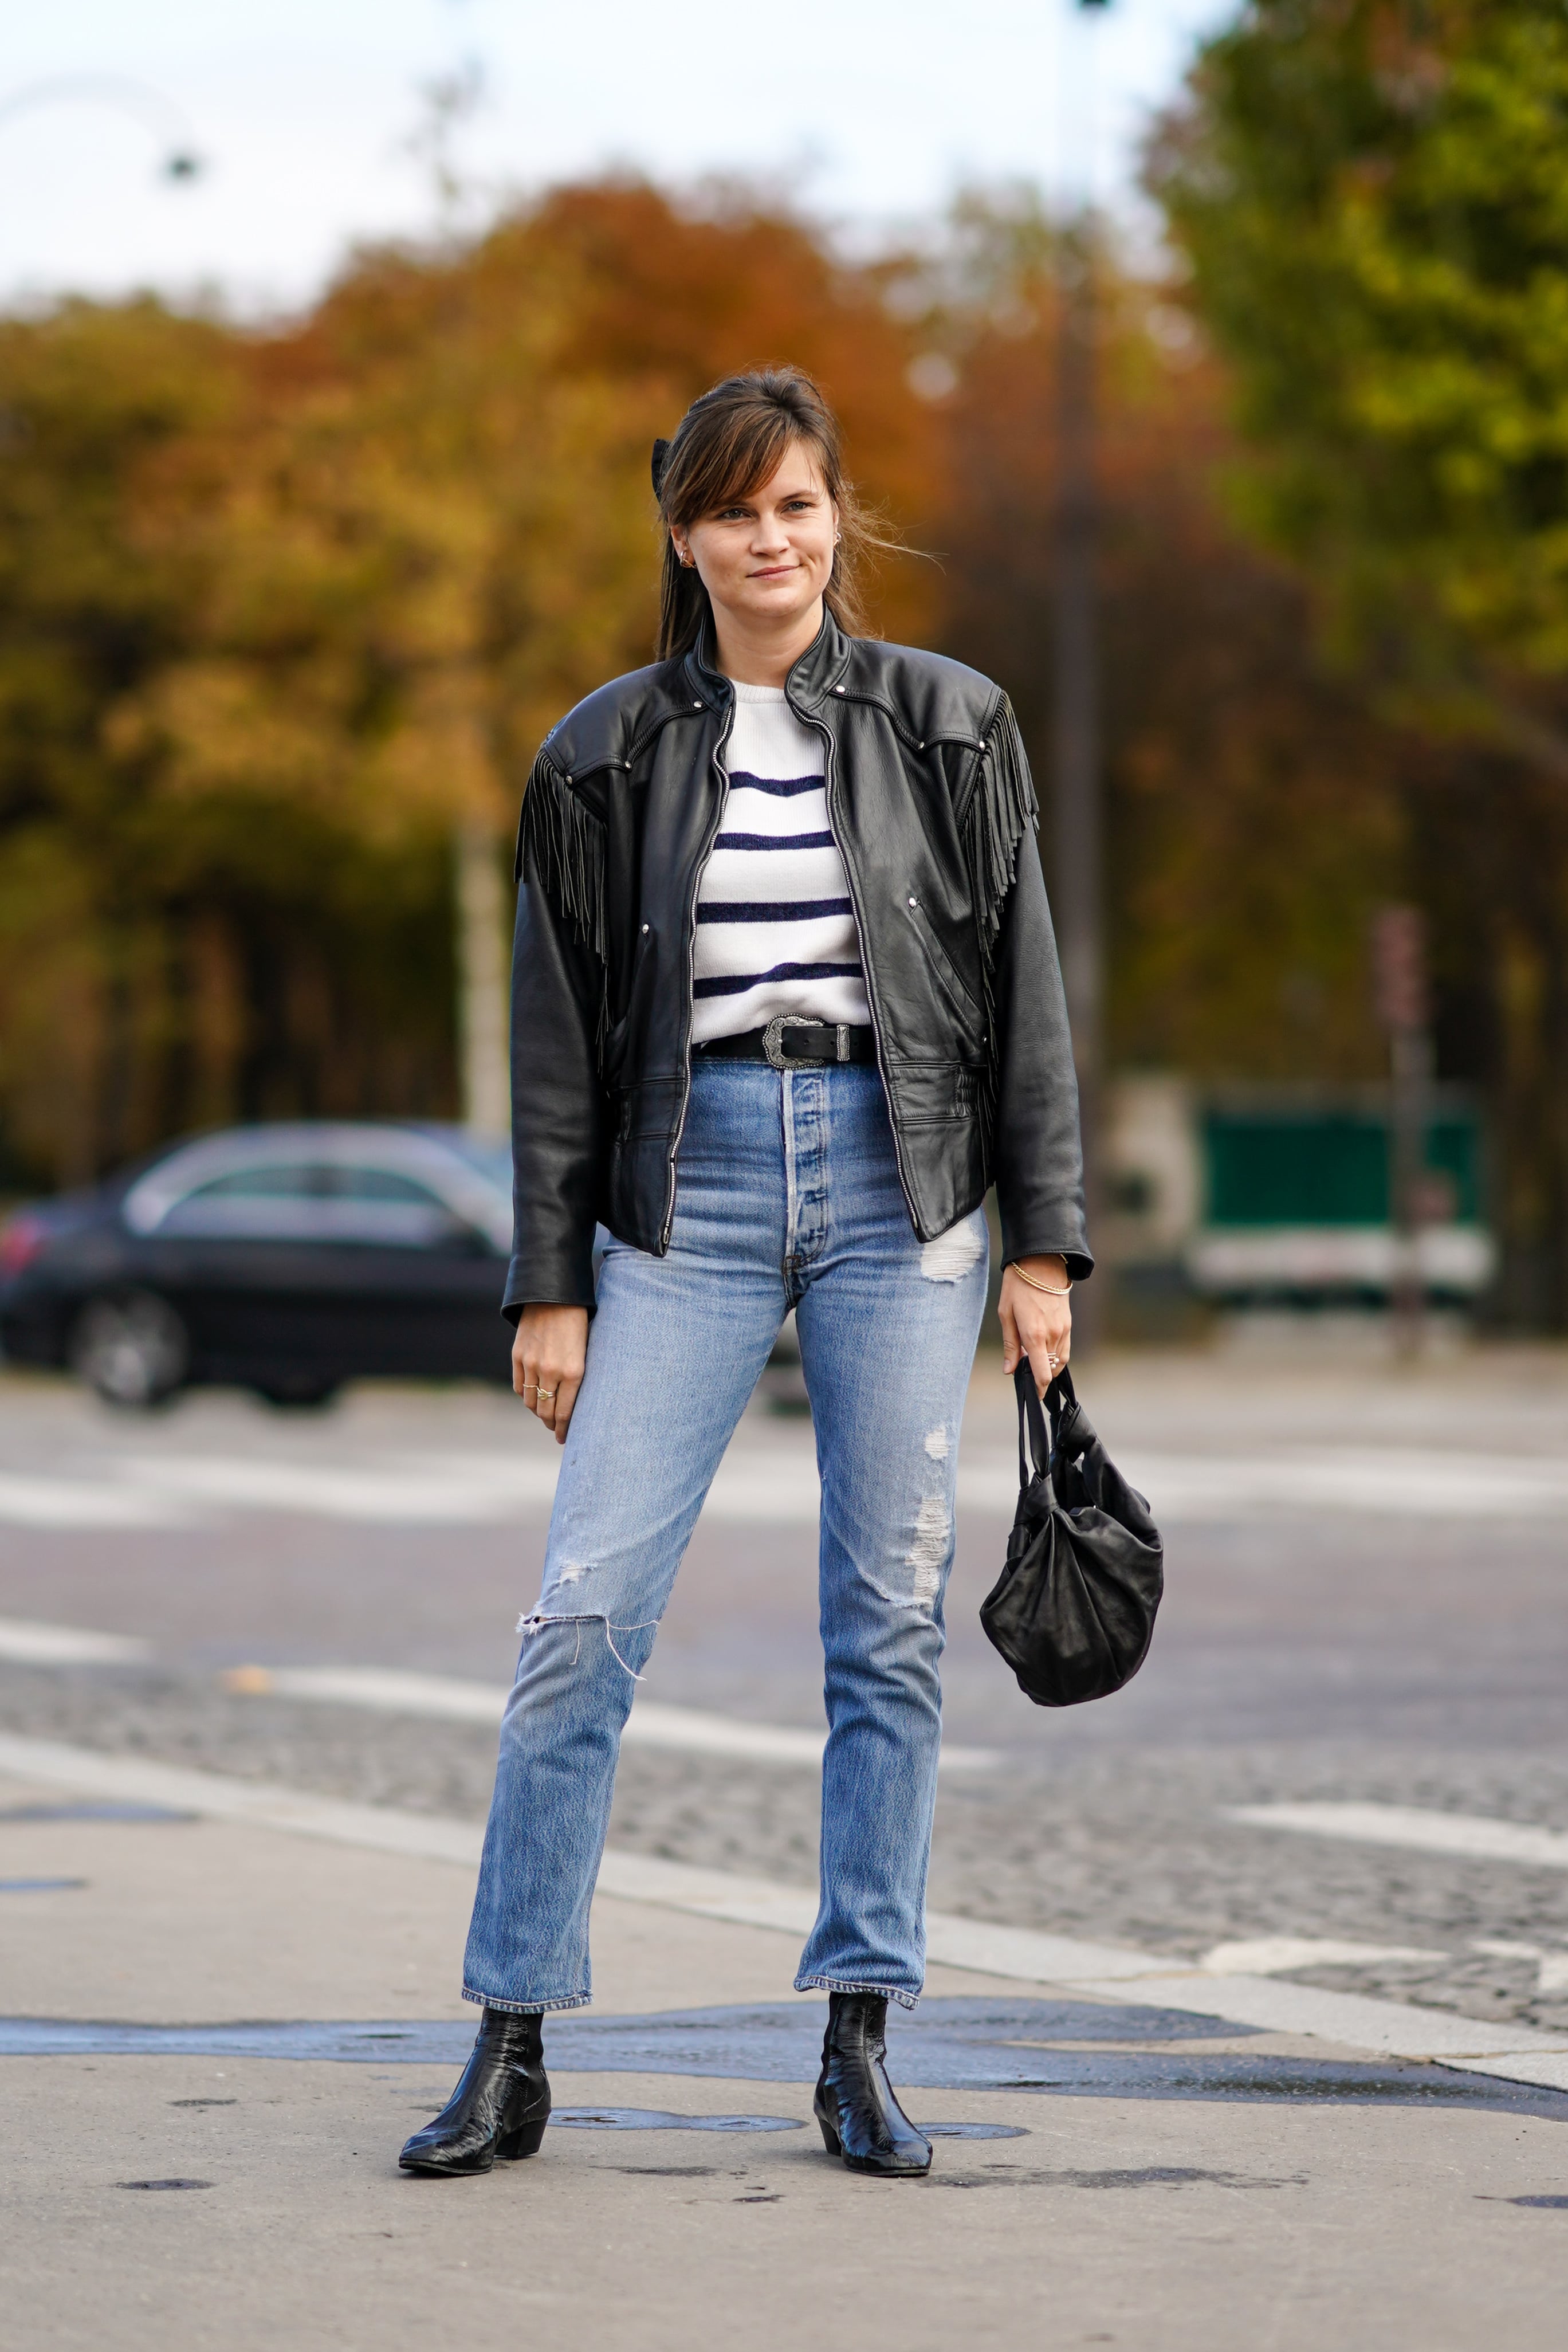 How To Wear Flat Ankle Boots With Jeans In 2022 - ljanestyle